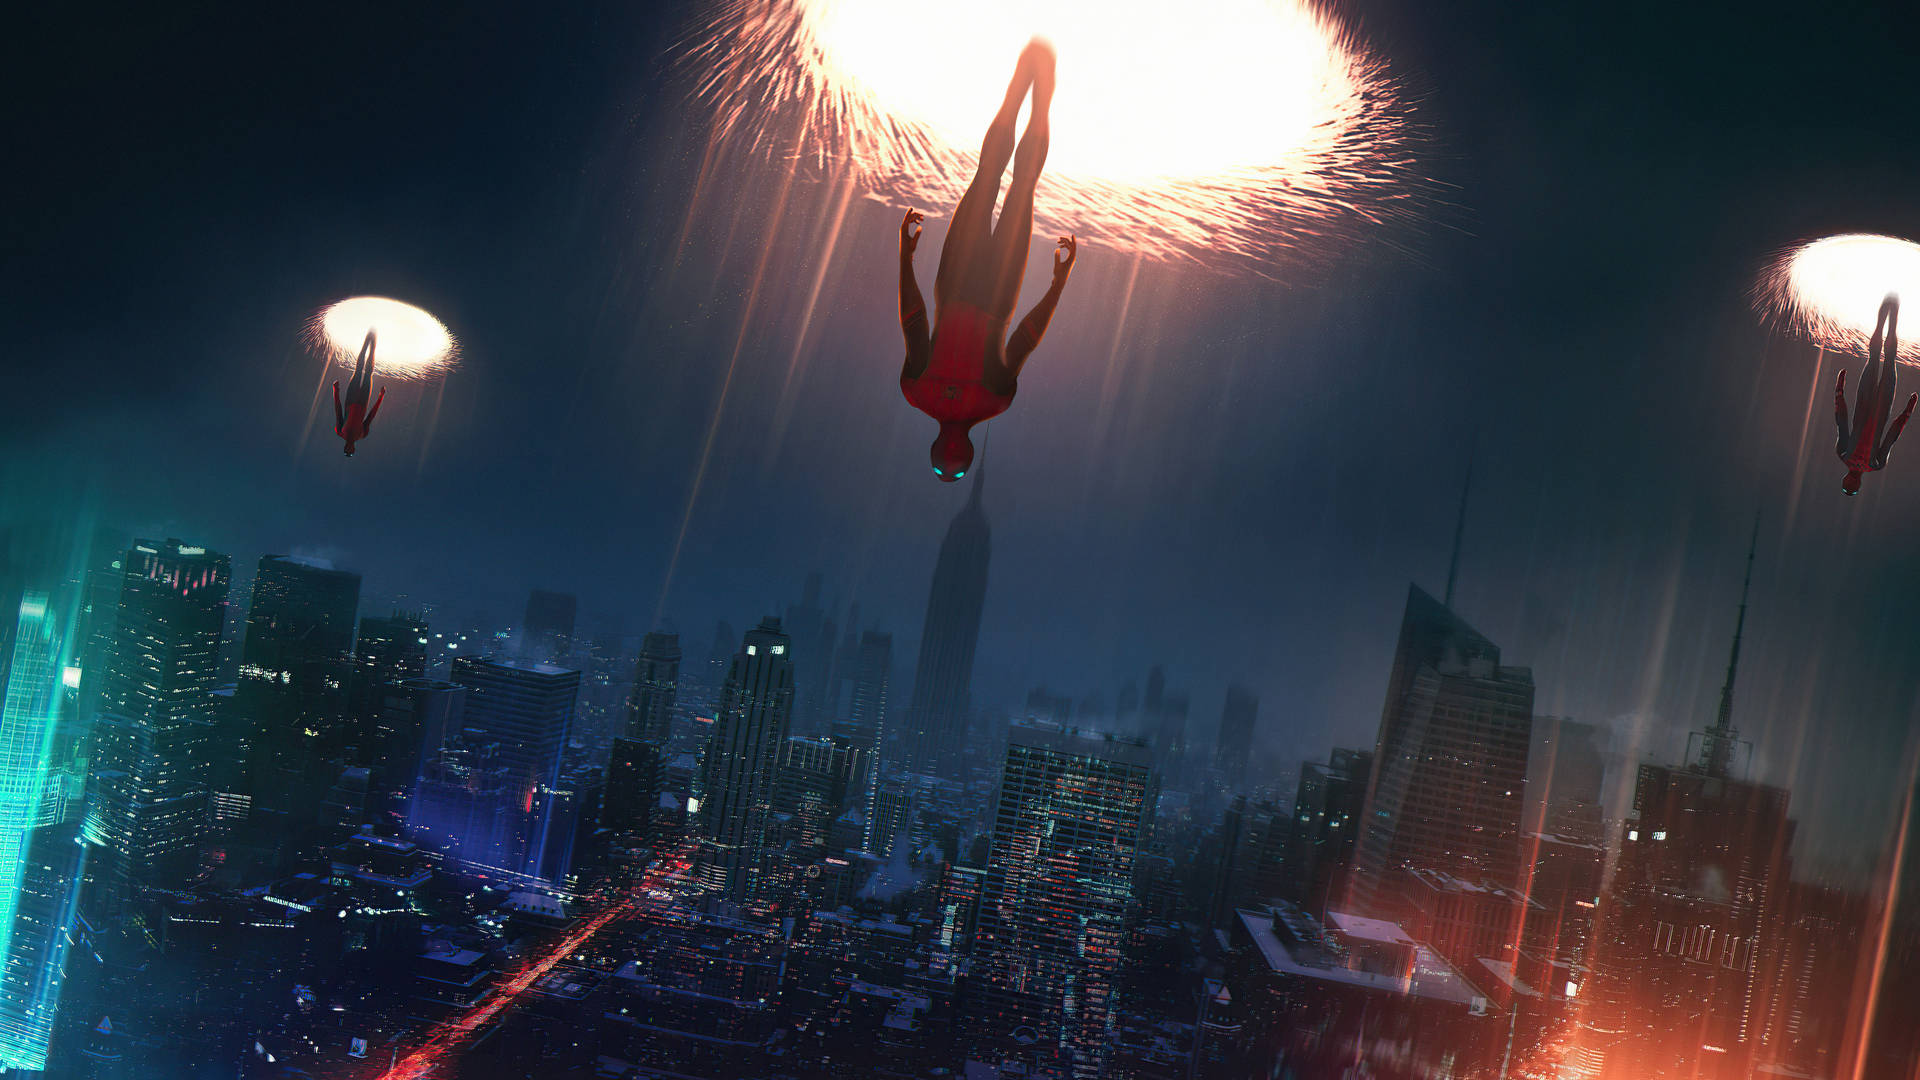 Spider Man No Way Home 5120X2880 Wallpaper and Background Image